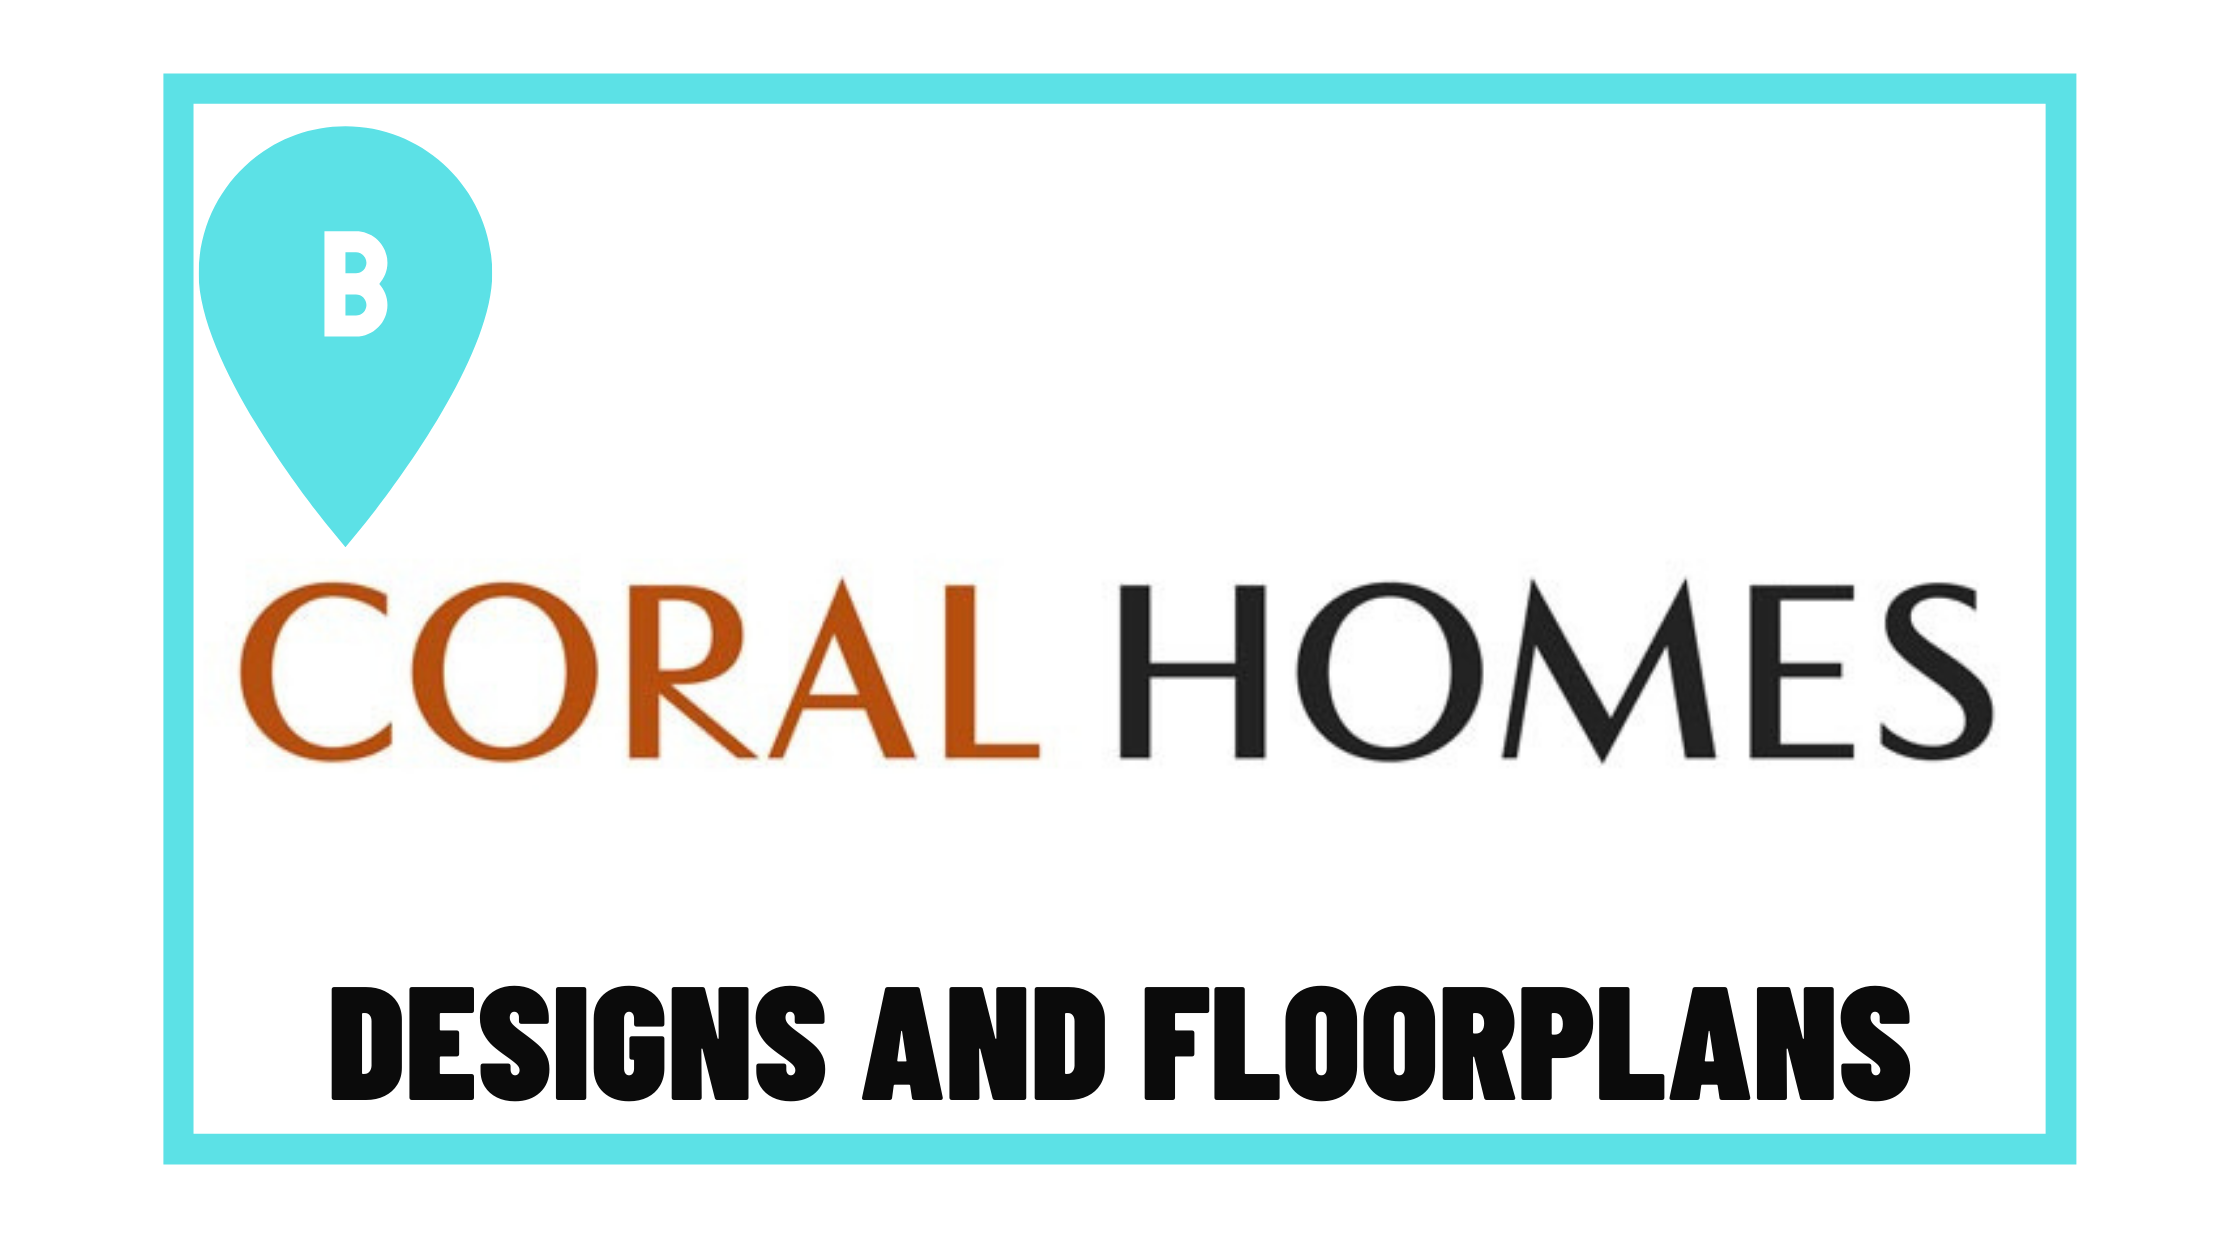 Coral Homes Designs and Floorplans